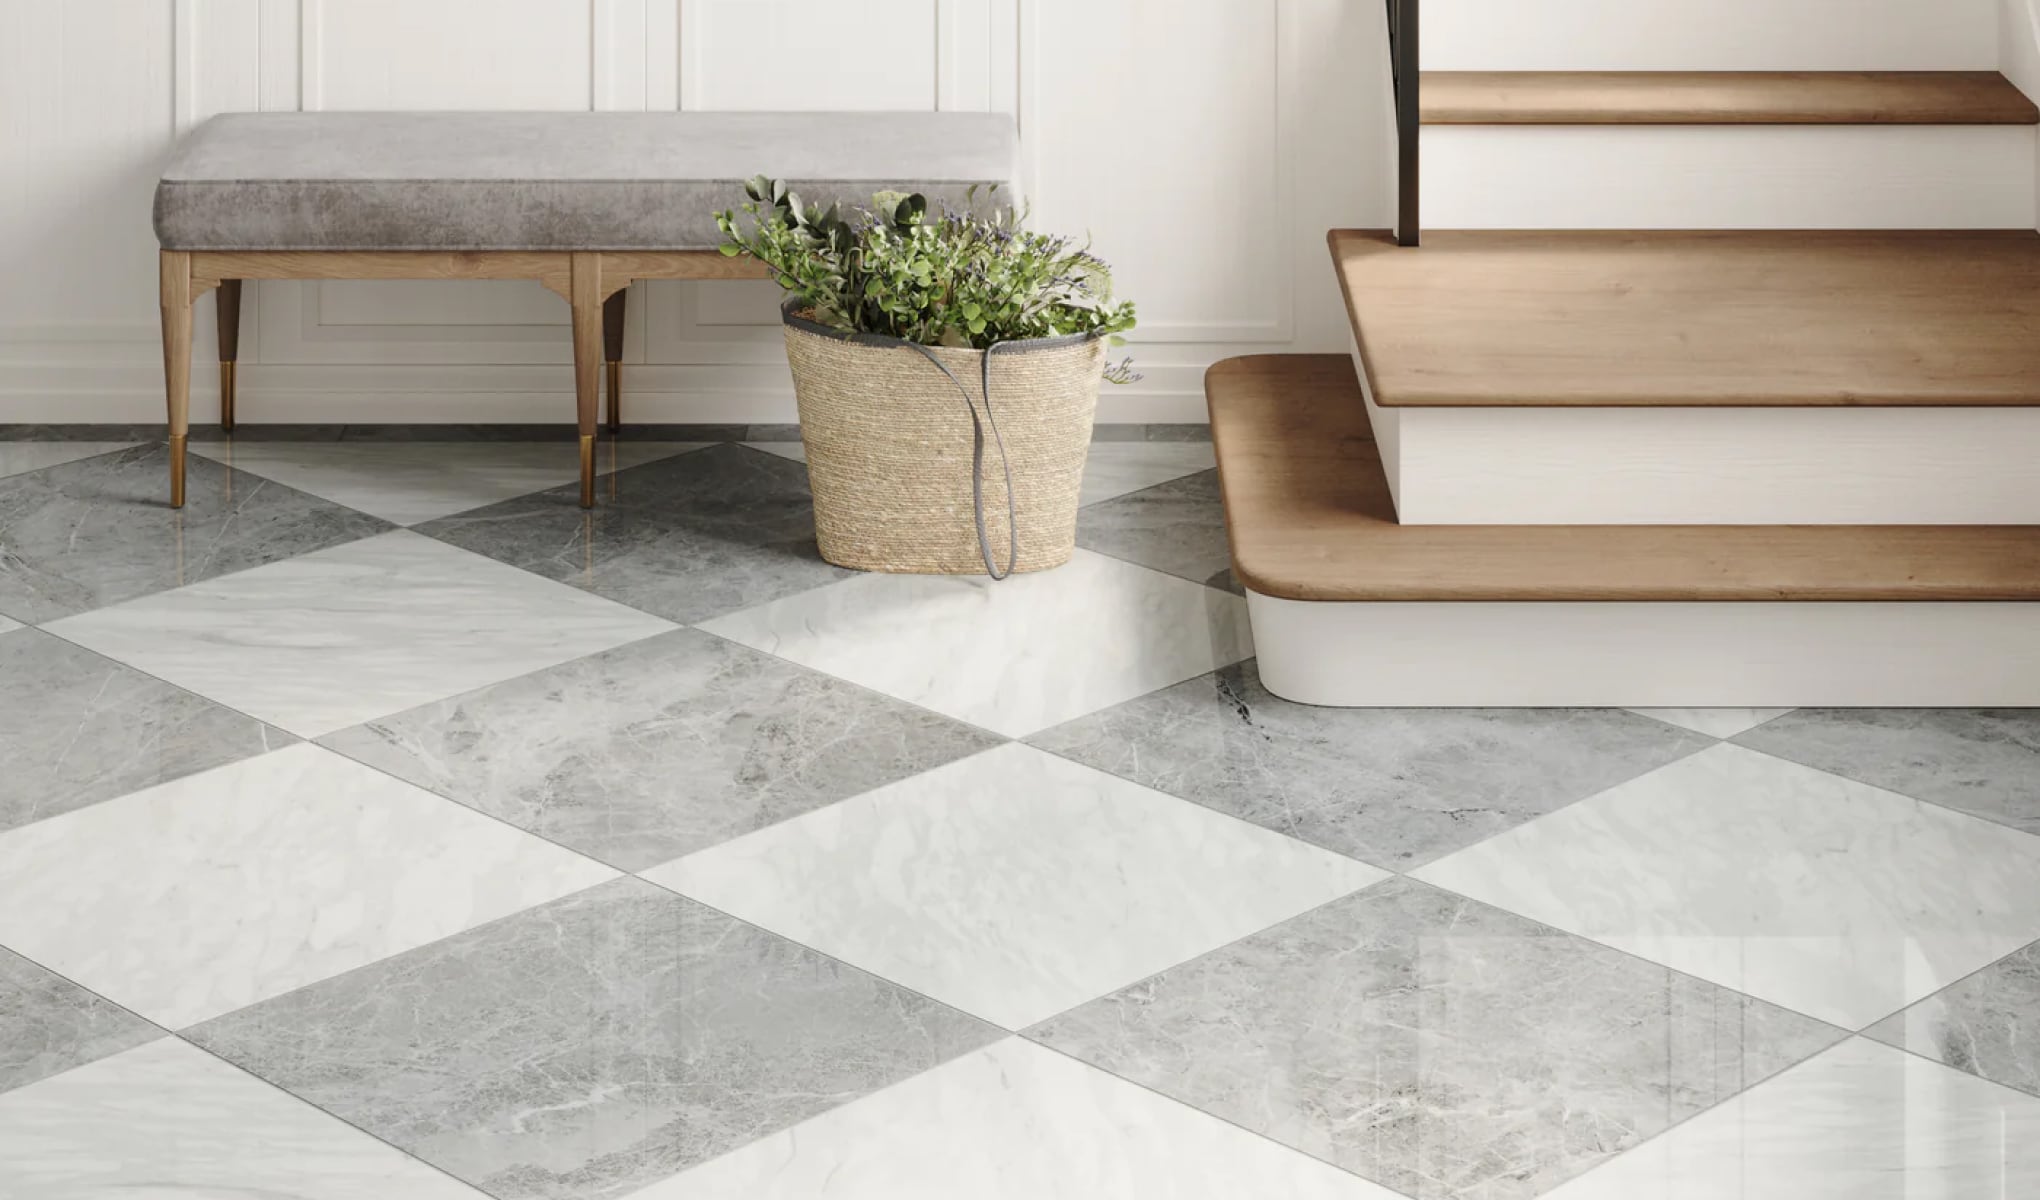 Stone Look Porcelain Floor Tiles in a checked design add opulence to any room with their luxurious, timeless appeal.